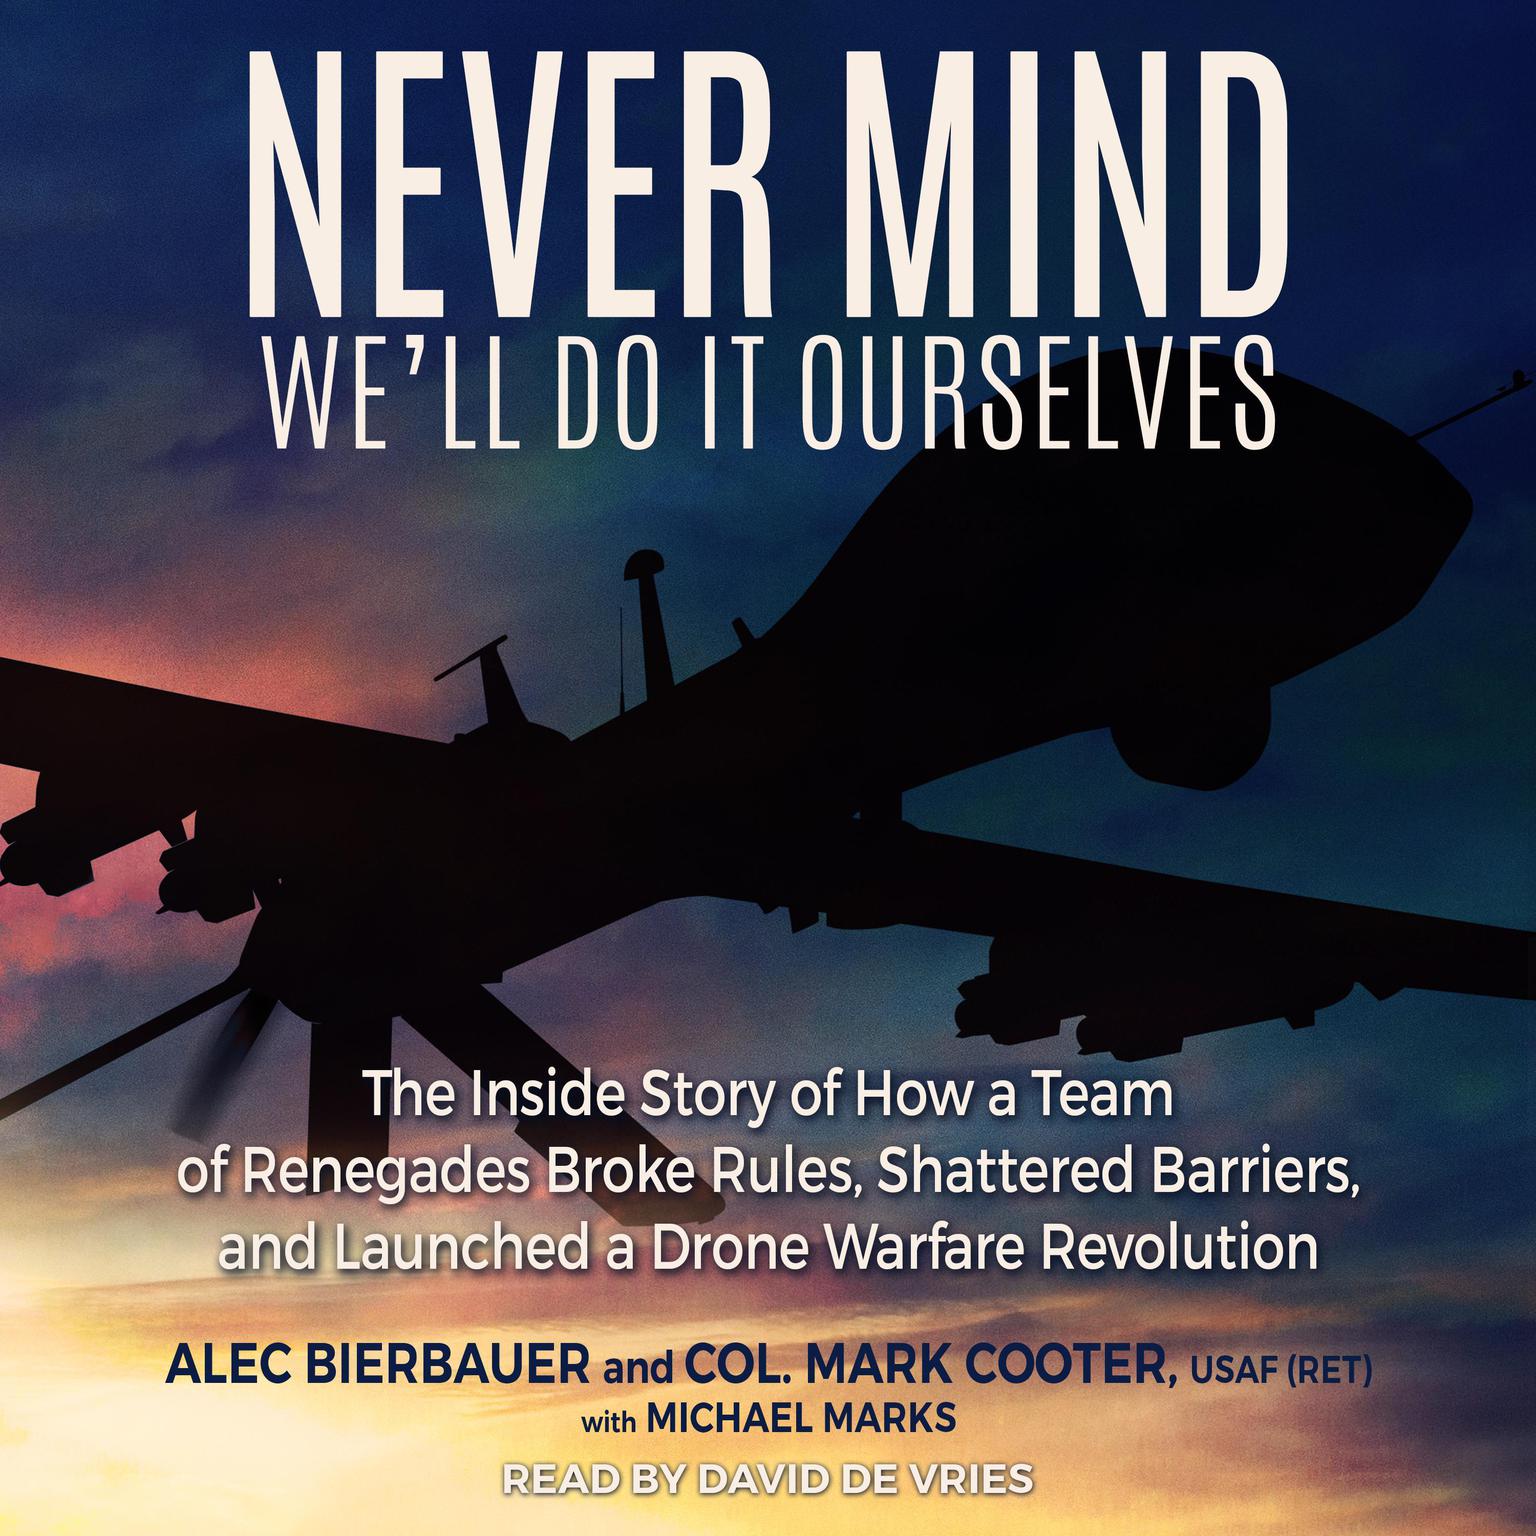 Never Mind, Well Do It Ourselves: The Inside Story of How a Team of Renegades Broke Rules, Shattered Barriers, and Launched a Drone Warfare Revolution Audiobook, by Alec Bierbauer